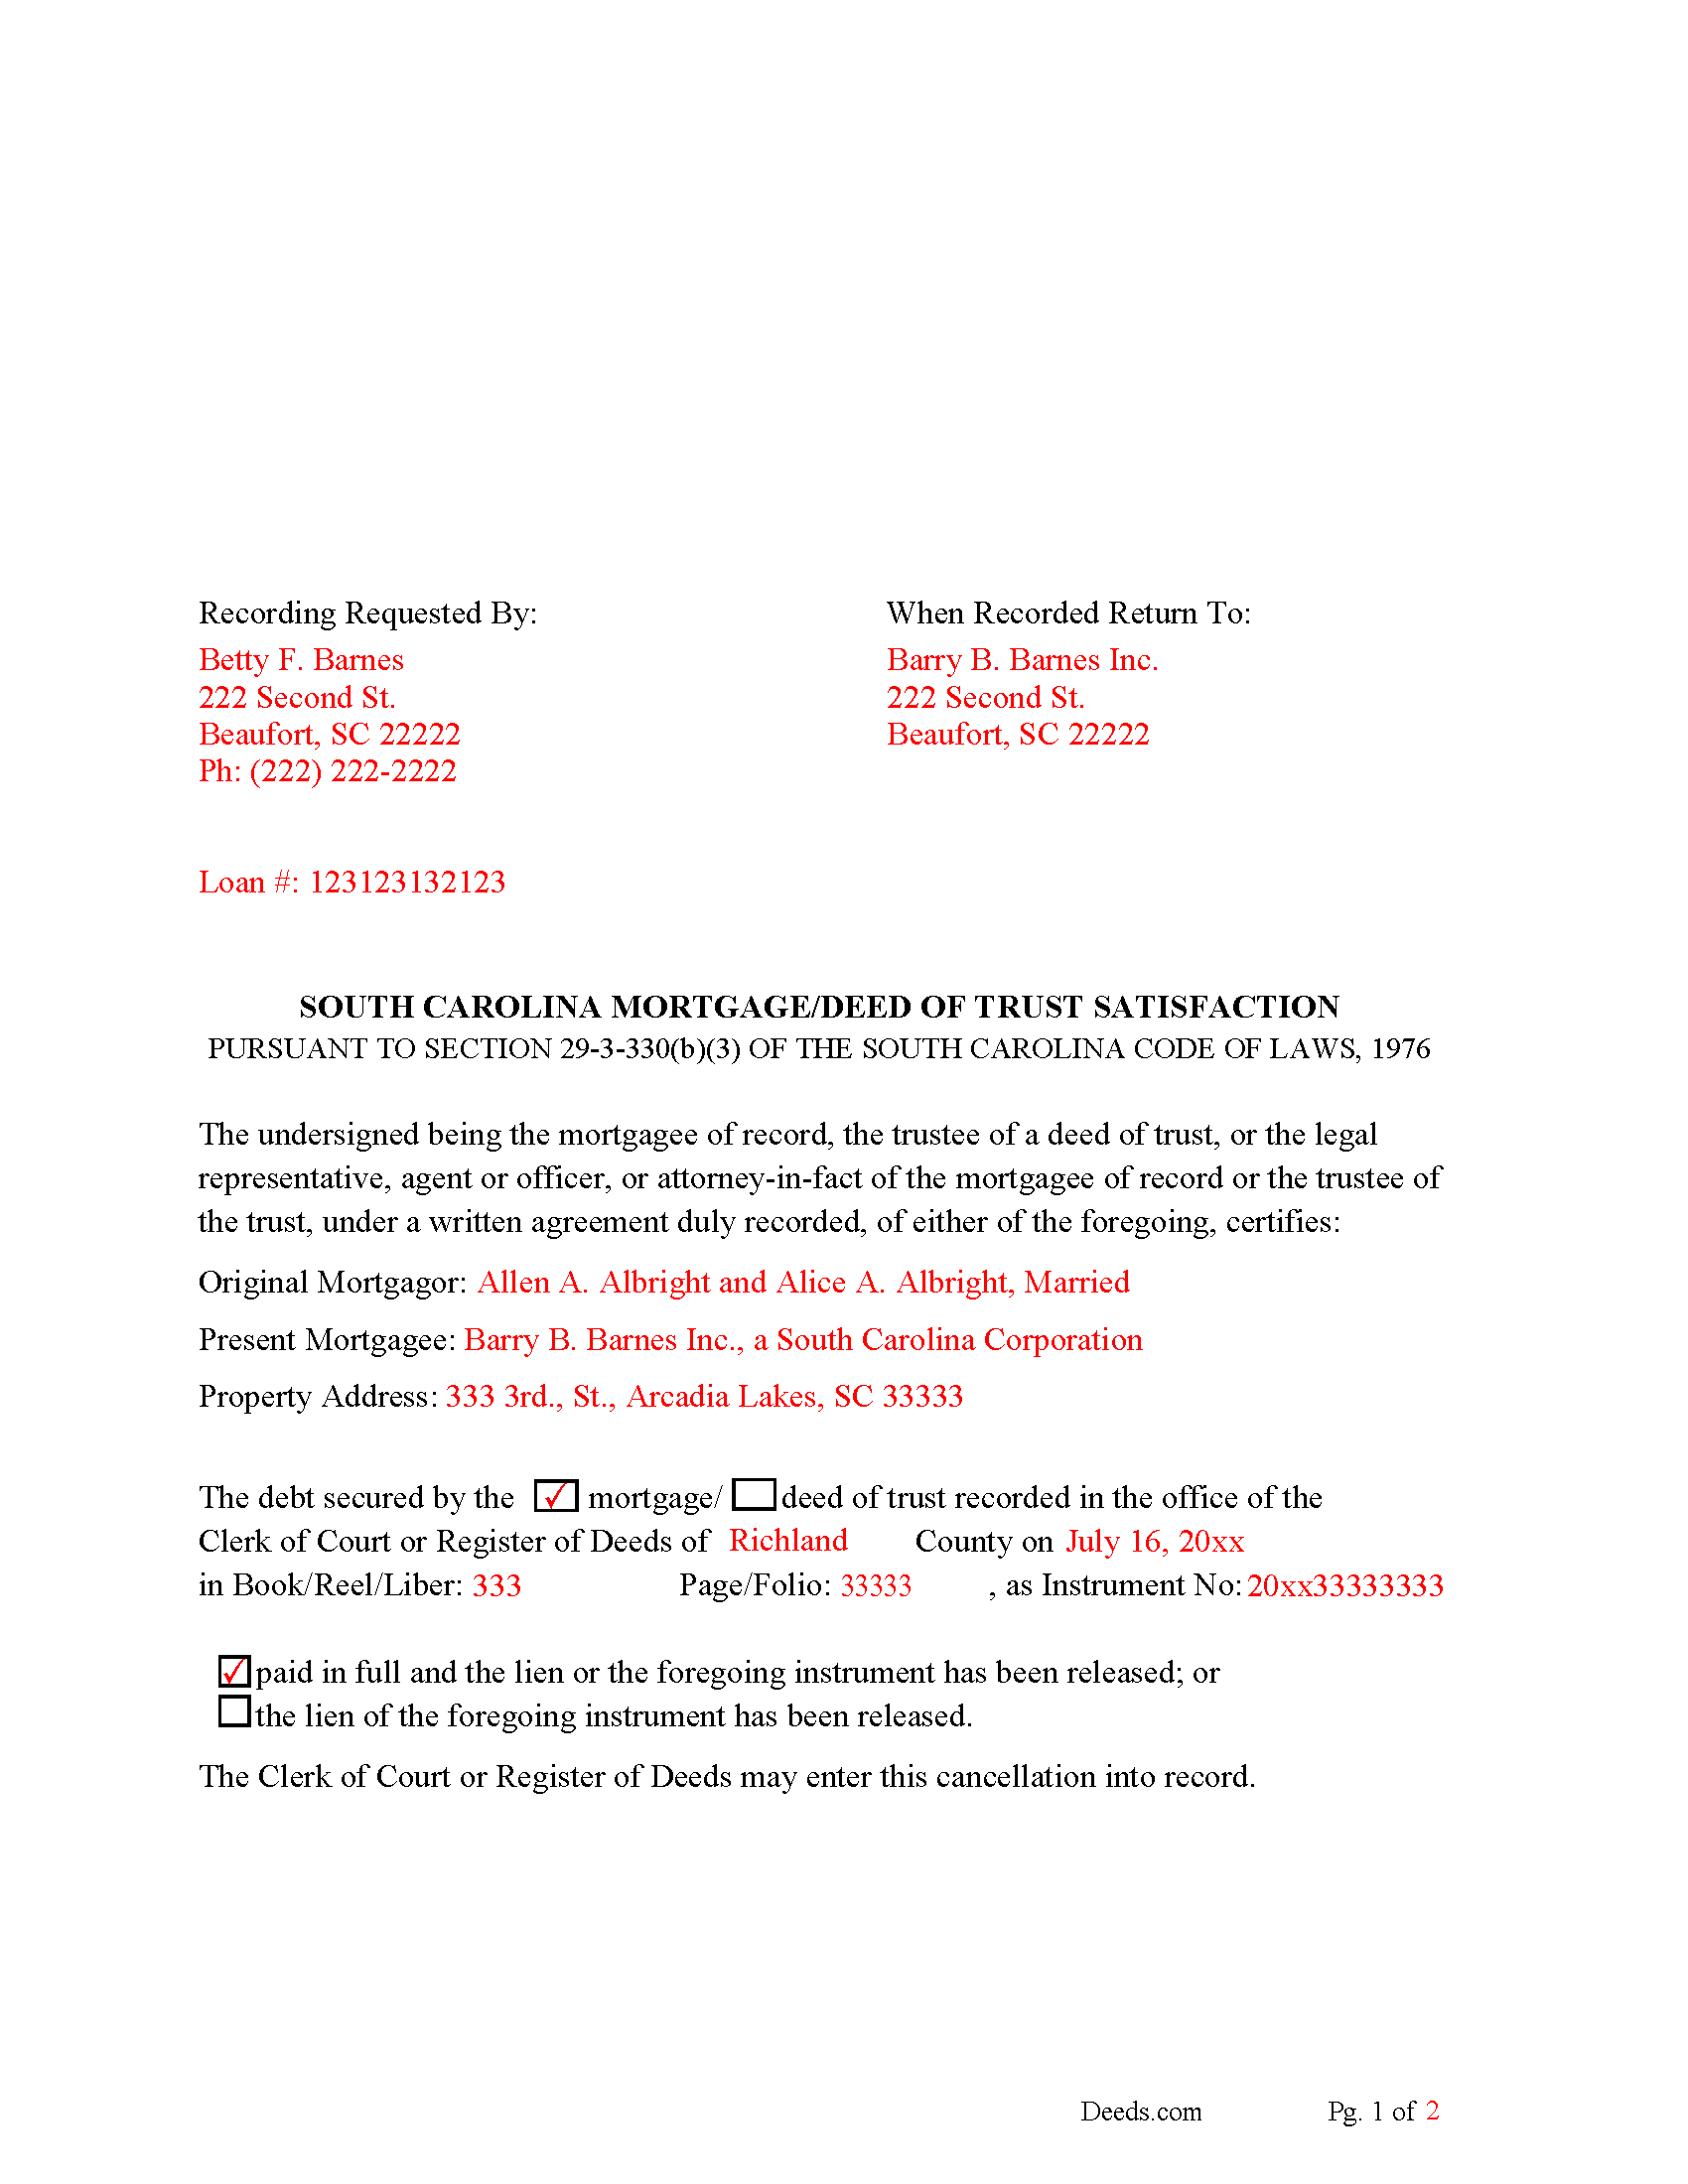 Completed Example of the Satisfaction of Mortgage of Deed of Trust Document